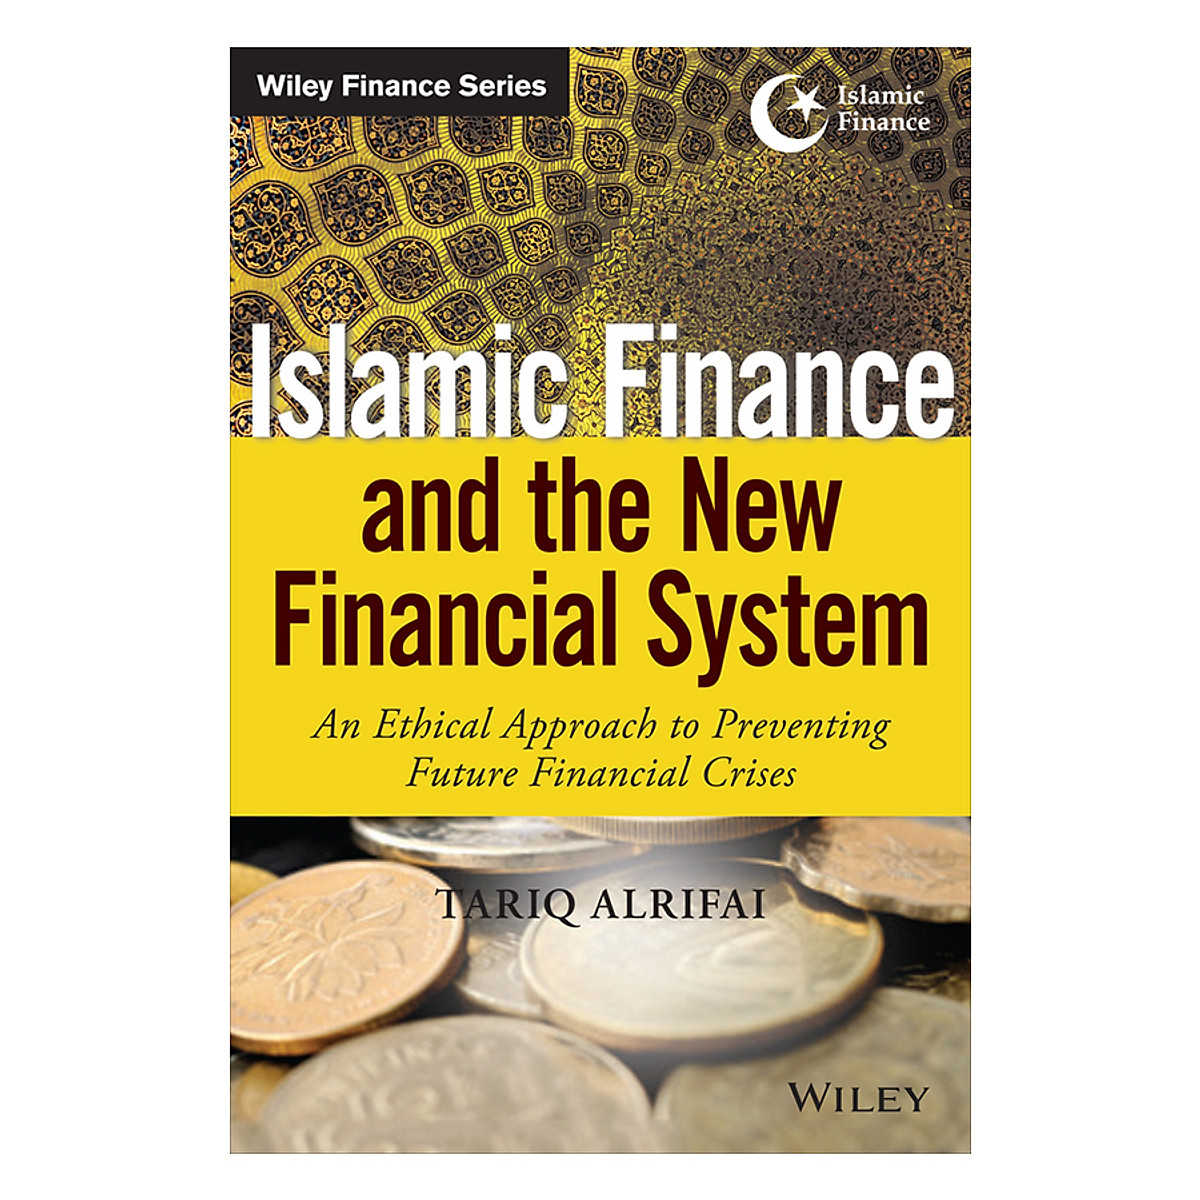 Islamic Finance And The New Financial System: An Ethical Approach To Preventing Future Financial Crises